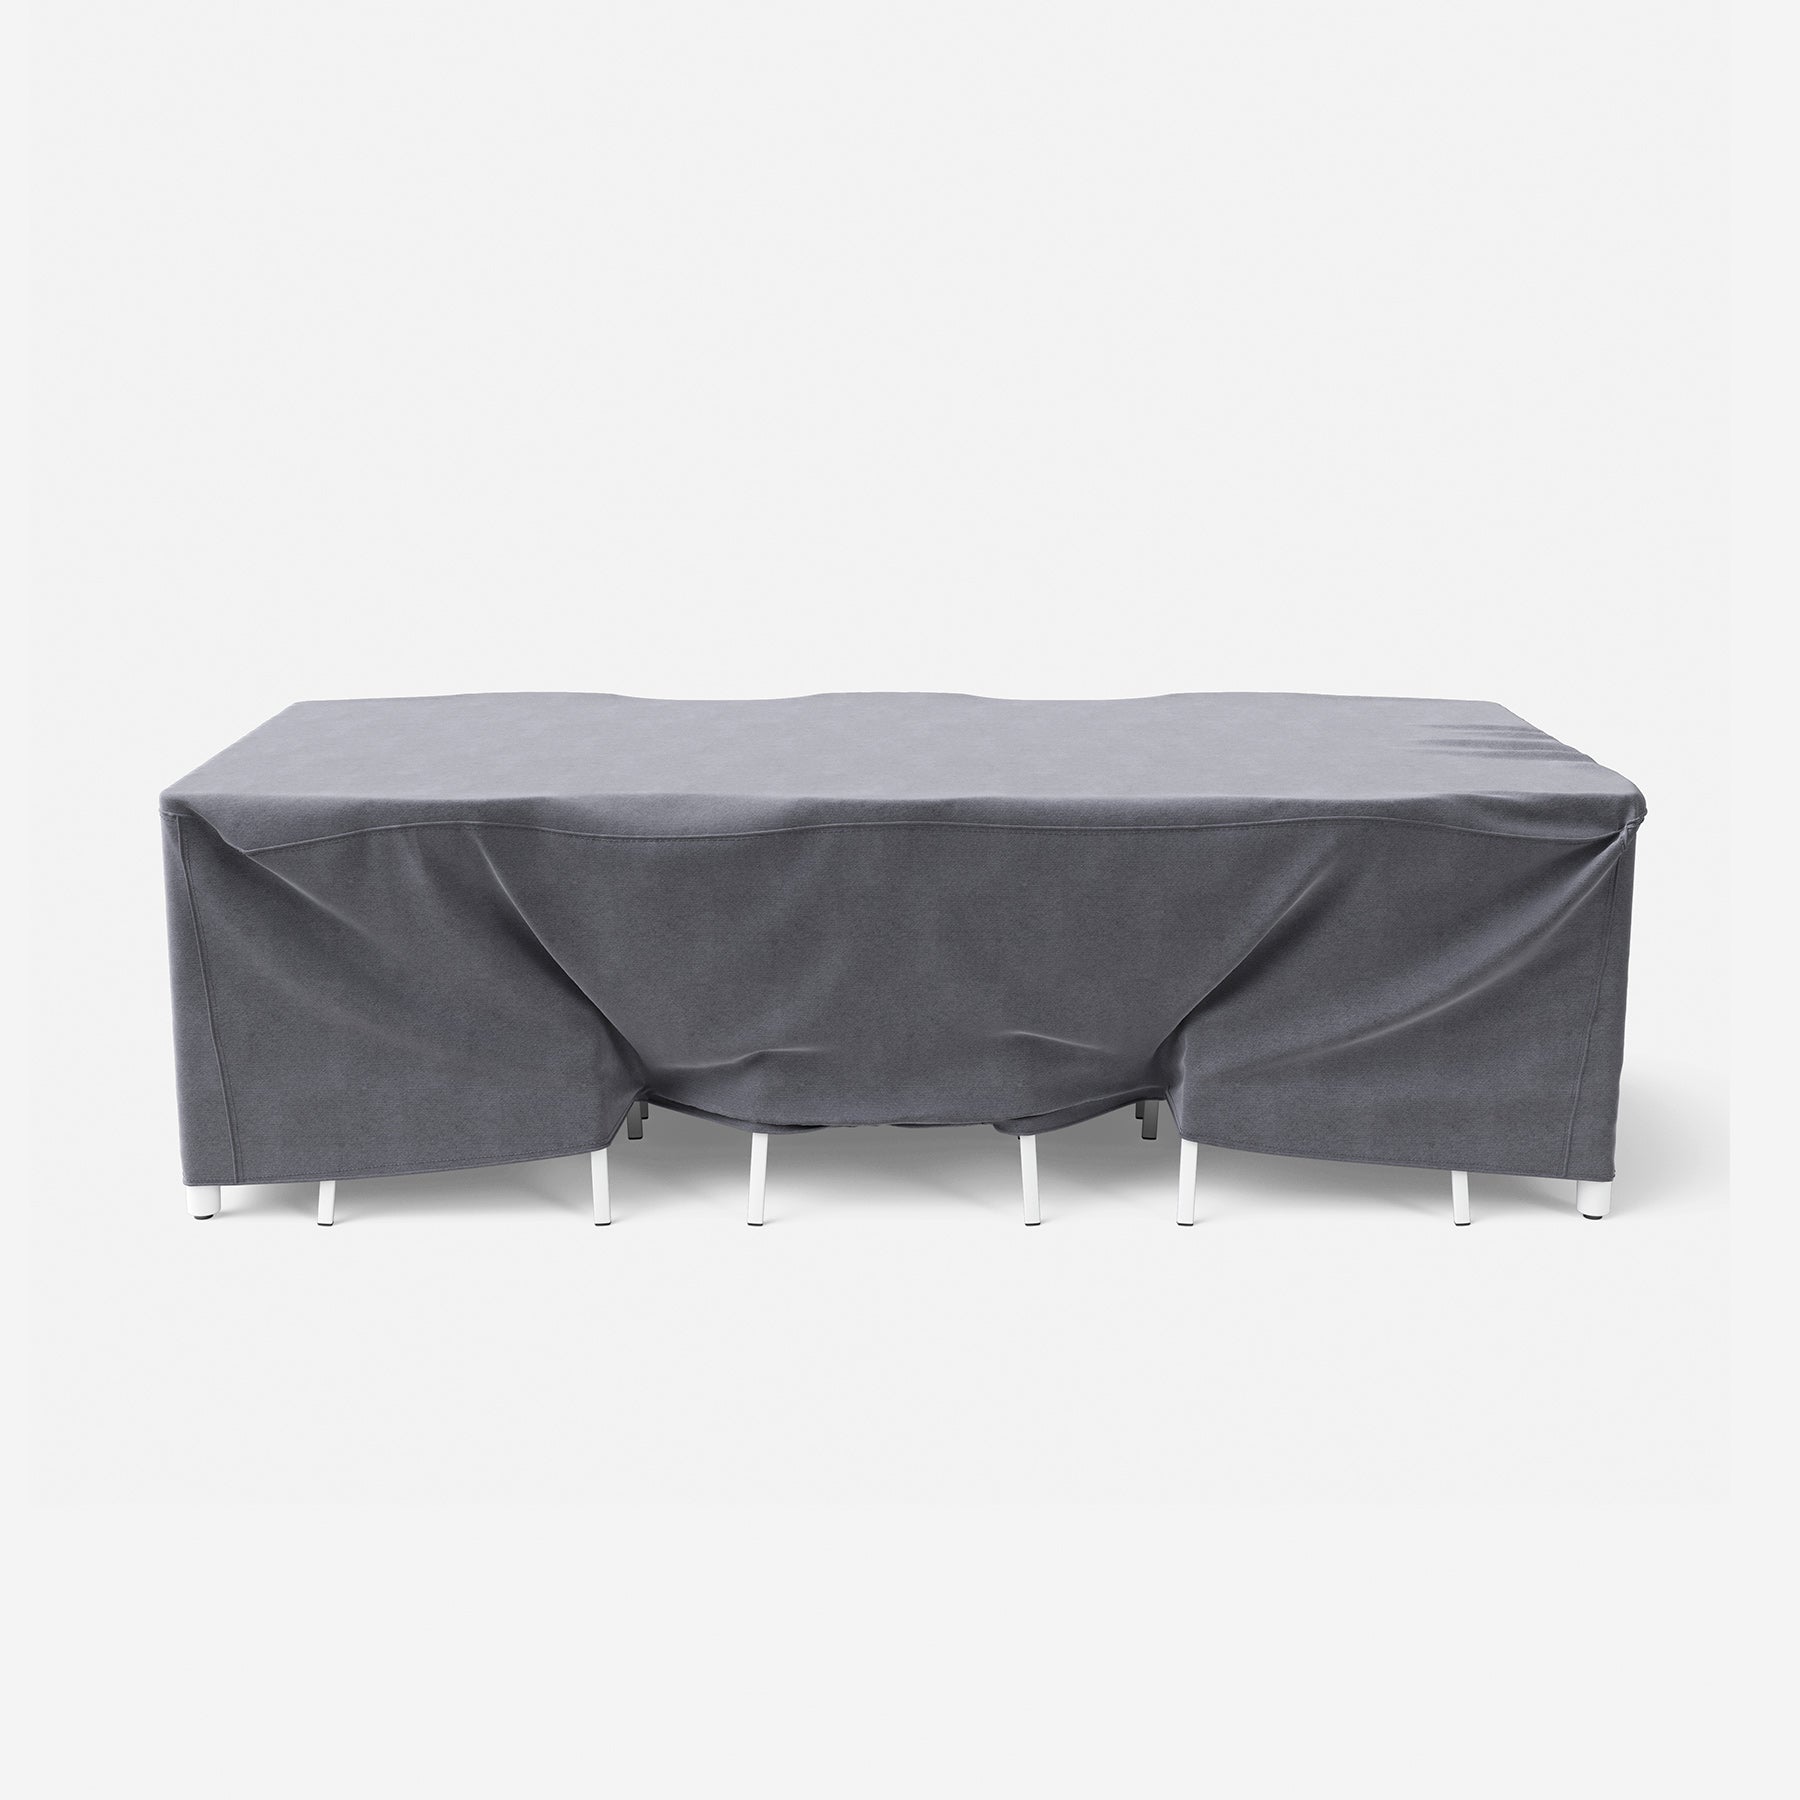 Vipp Open Air Table Cover